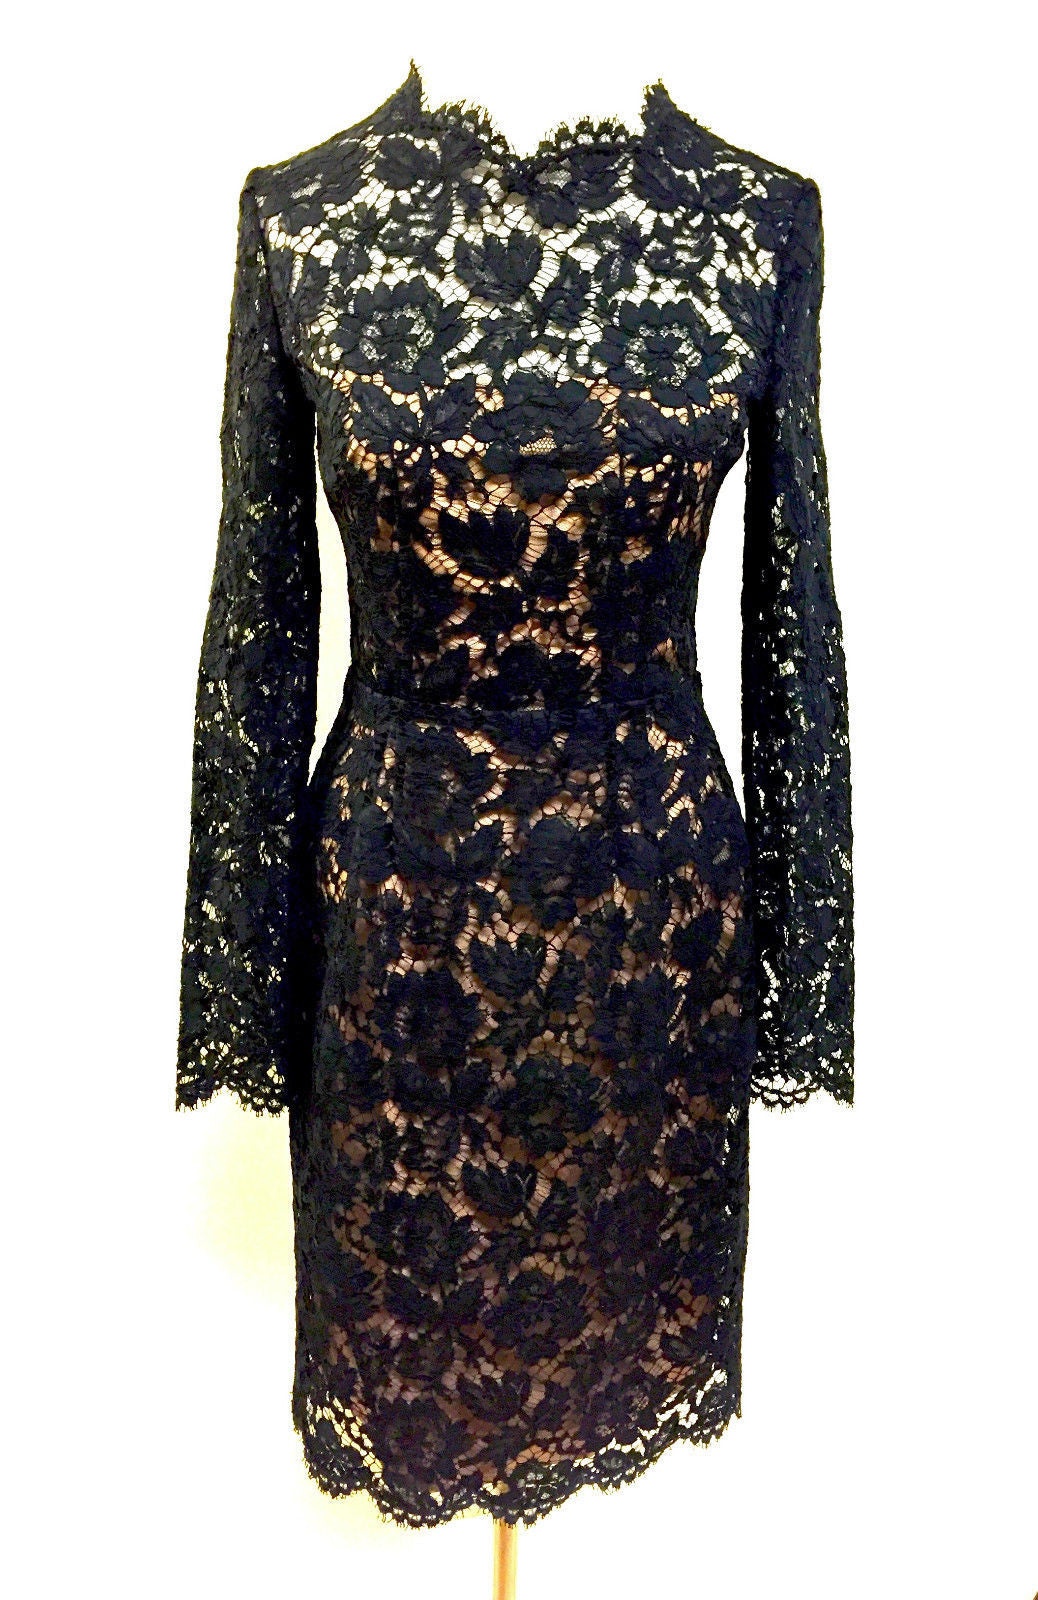 black lace dress with beige lining